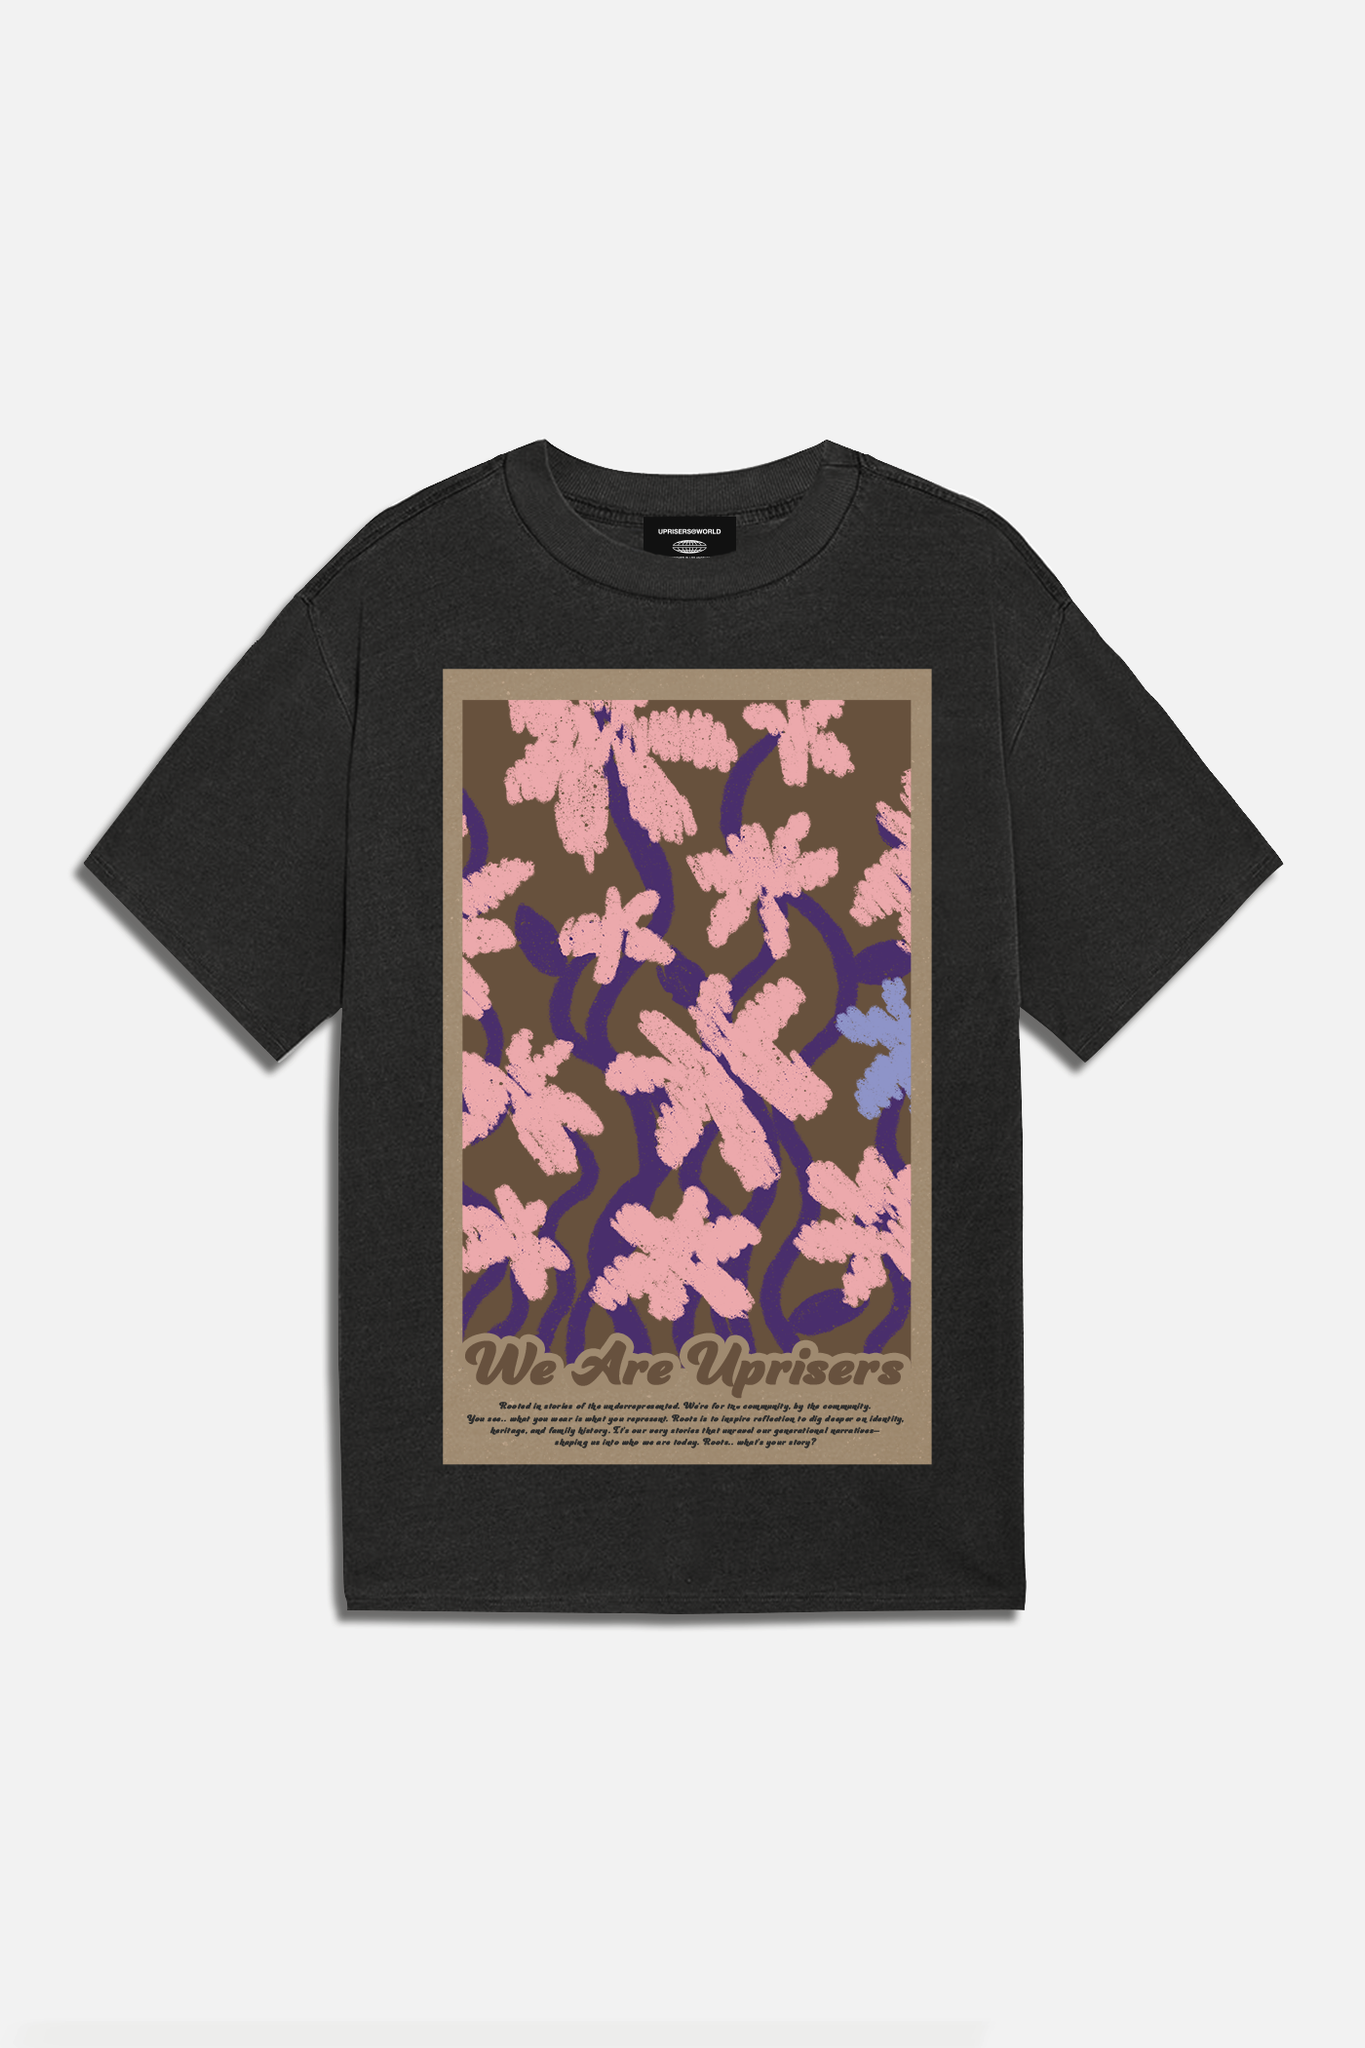 Imperfect Uprisers.World x Complex Roots Vintage Black Tee Oversized We are Uprisers floral graphic